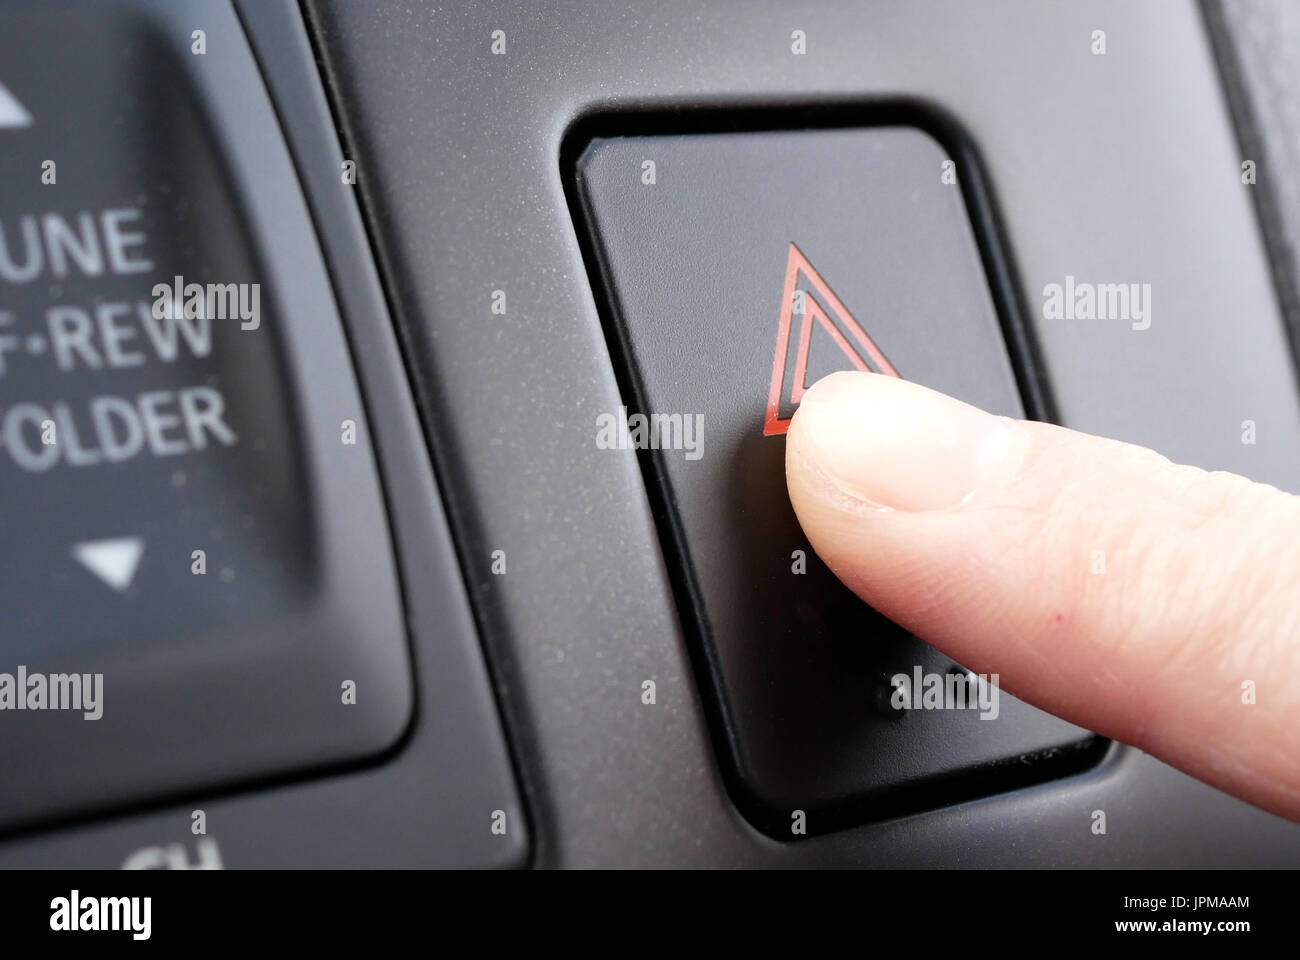 A woman's hand presses the emergency button on car dashboard Stock Photo